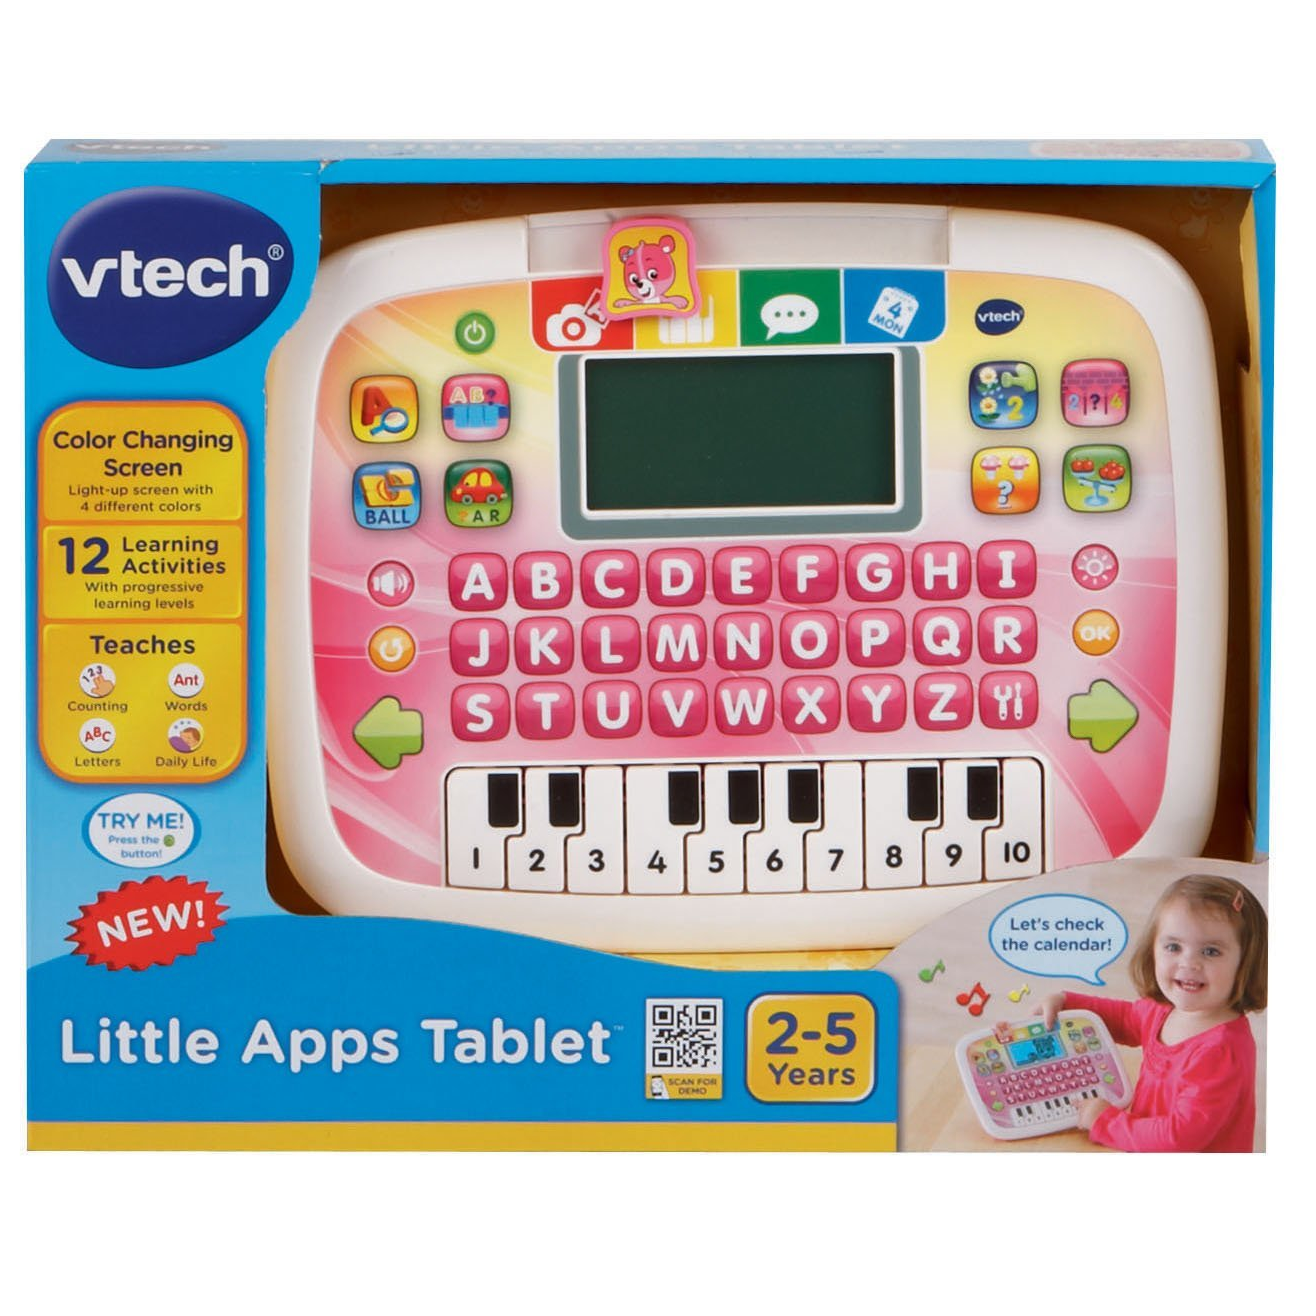 VTech Little Apps Tablet Only $12.50! (Reg $27.84) Highly Rated!